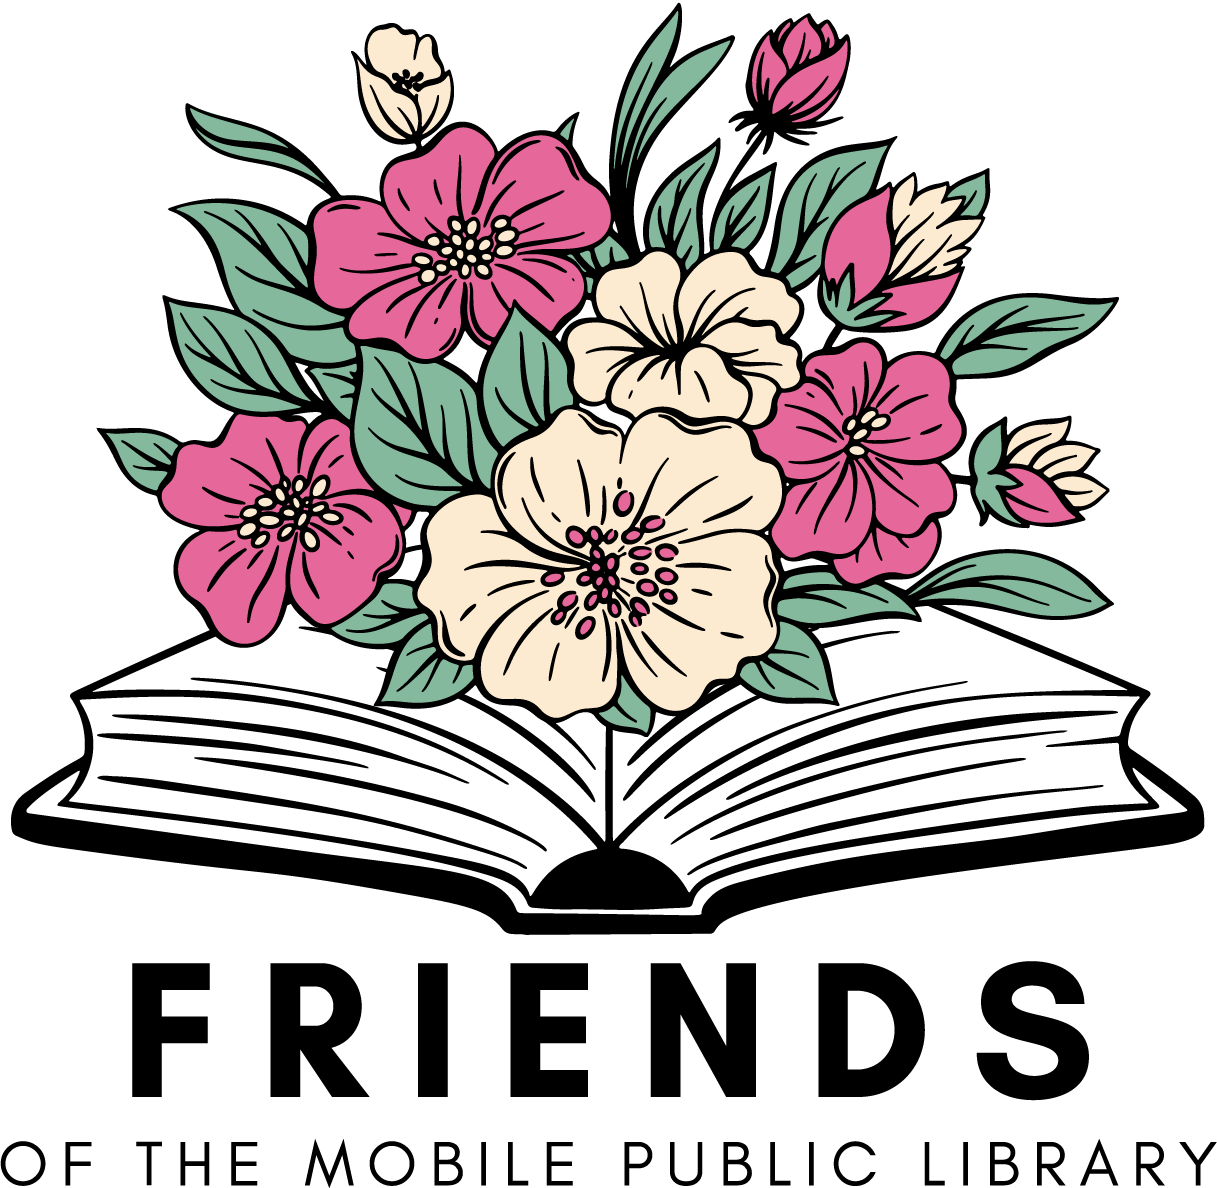 Friends of the Mobile Public Library logo